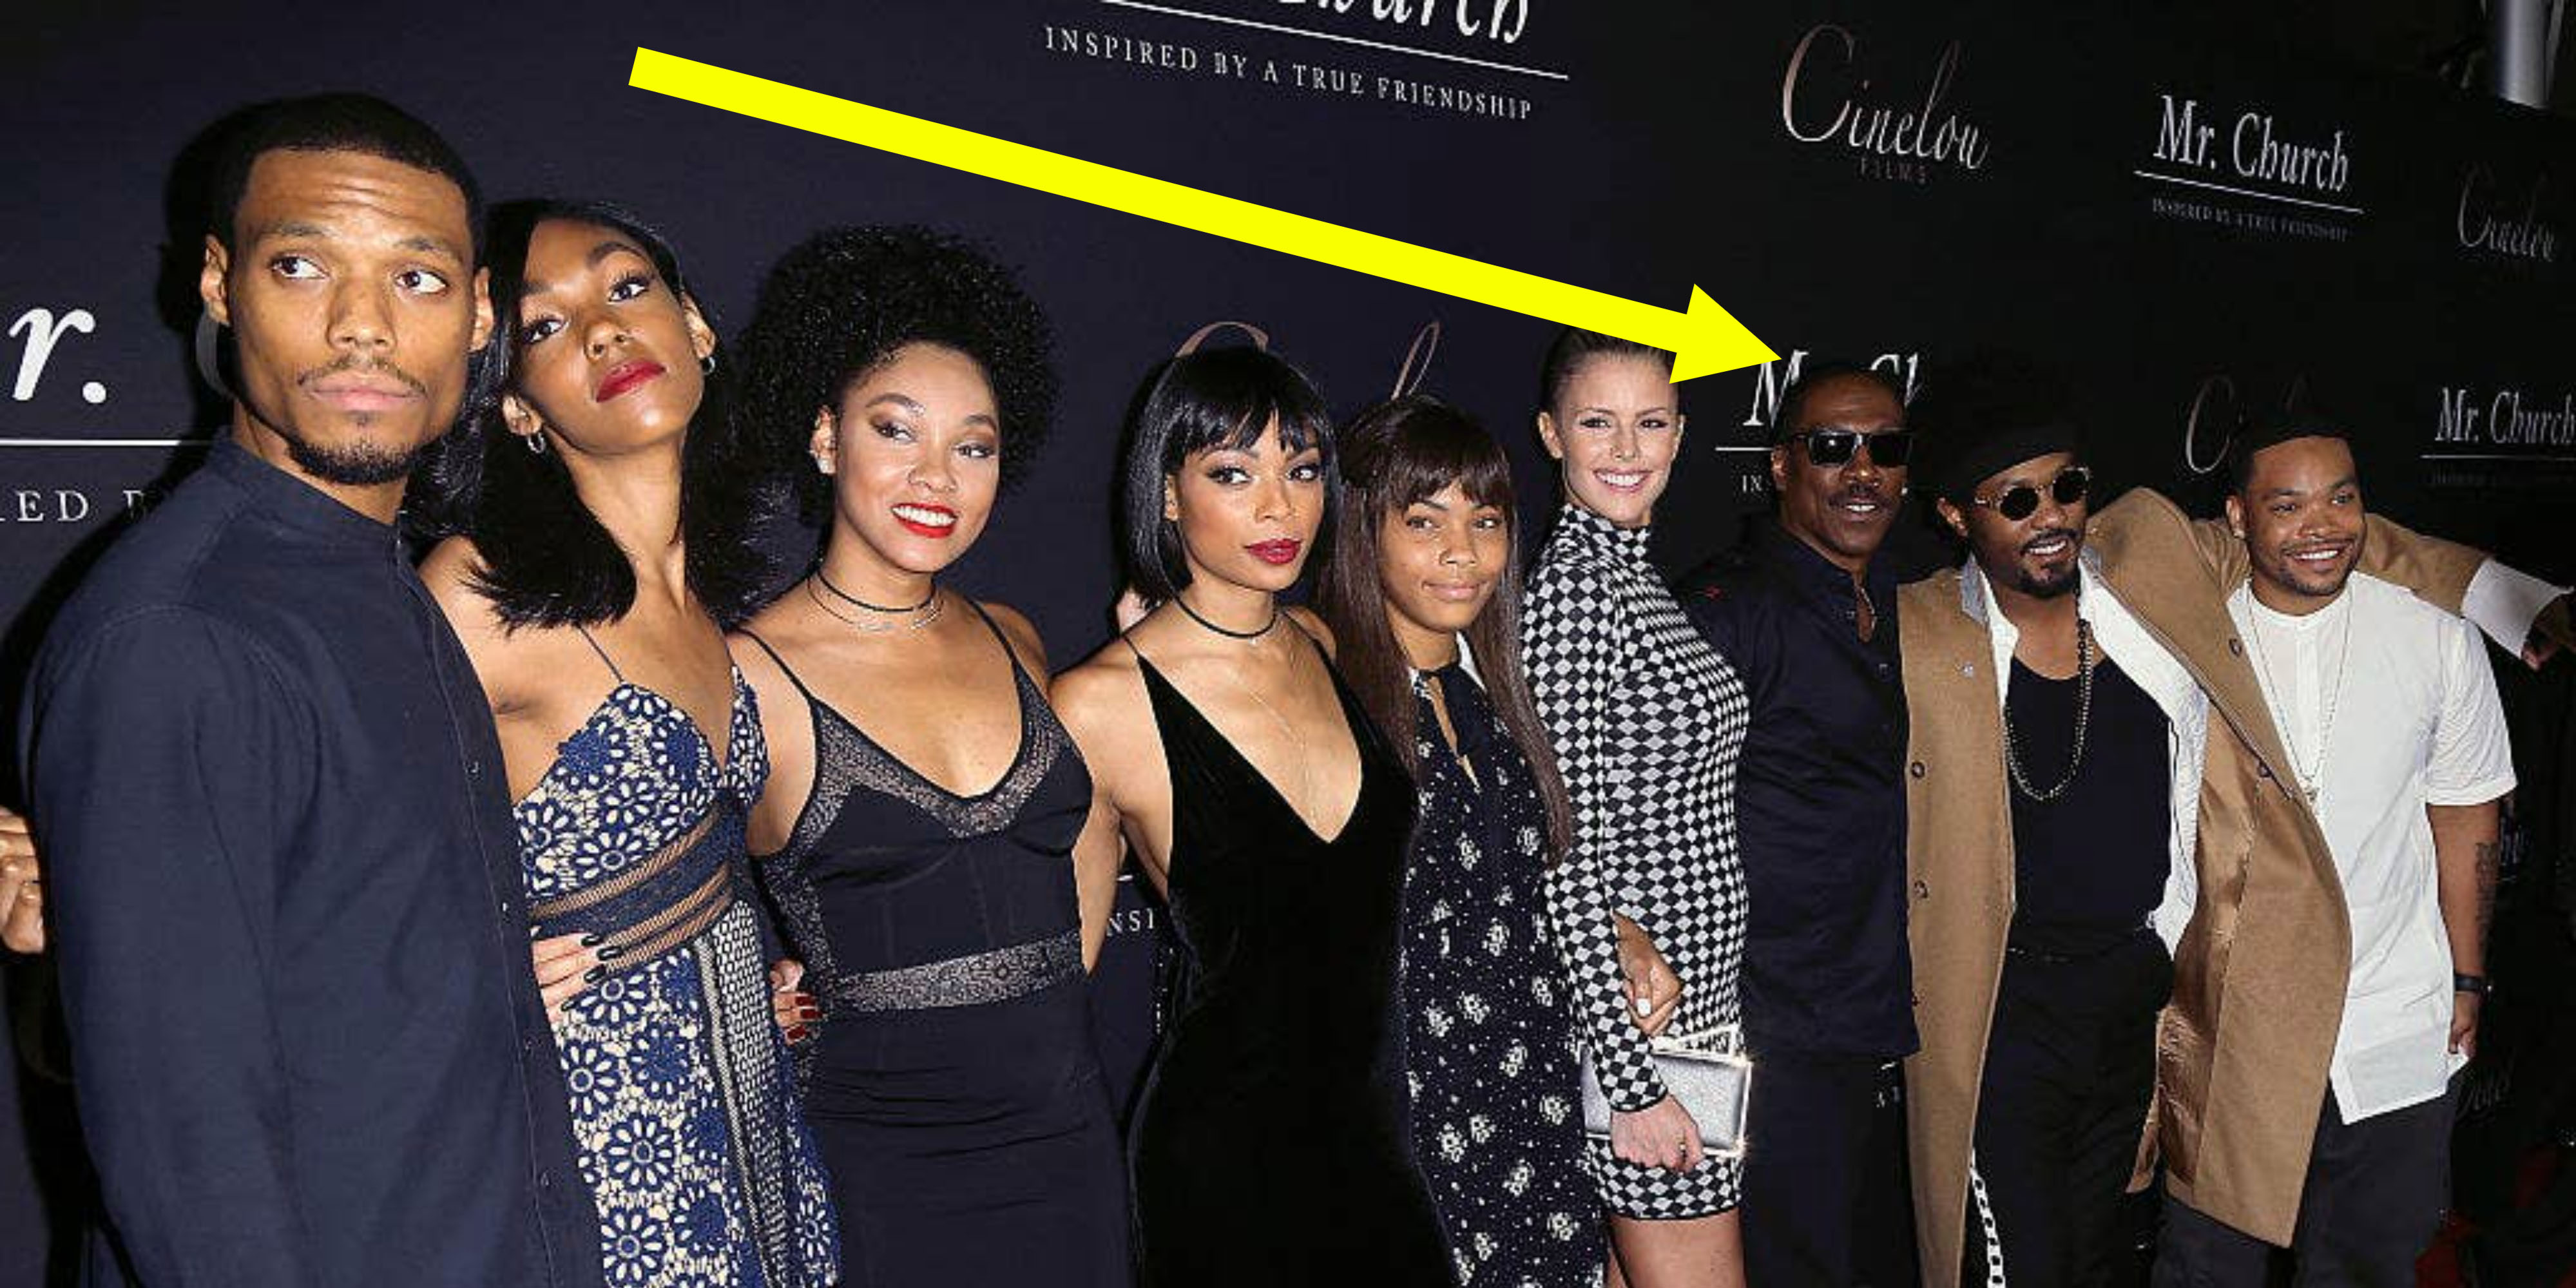 Nick Cannon And 16 Other5 -Nick Cannon And 16 Other Famous People Who Have A Bunch Of Children